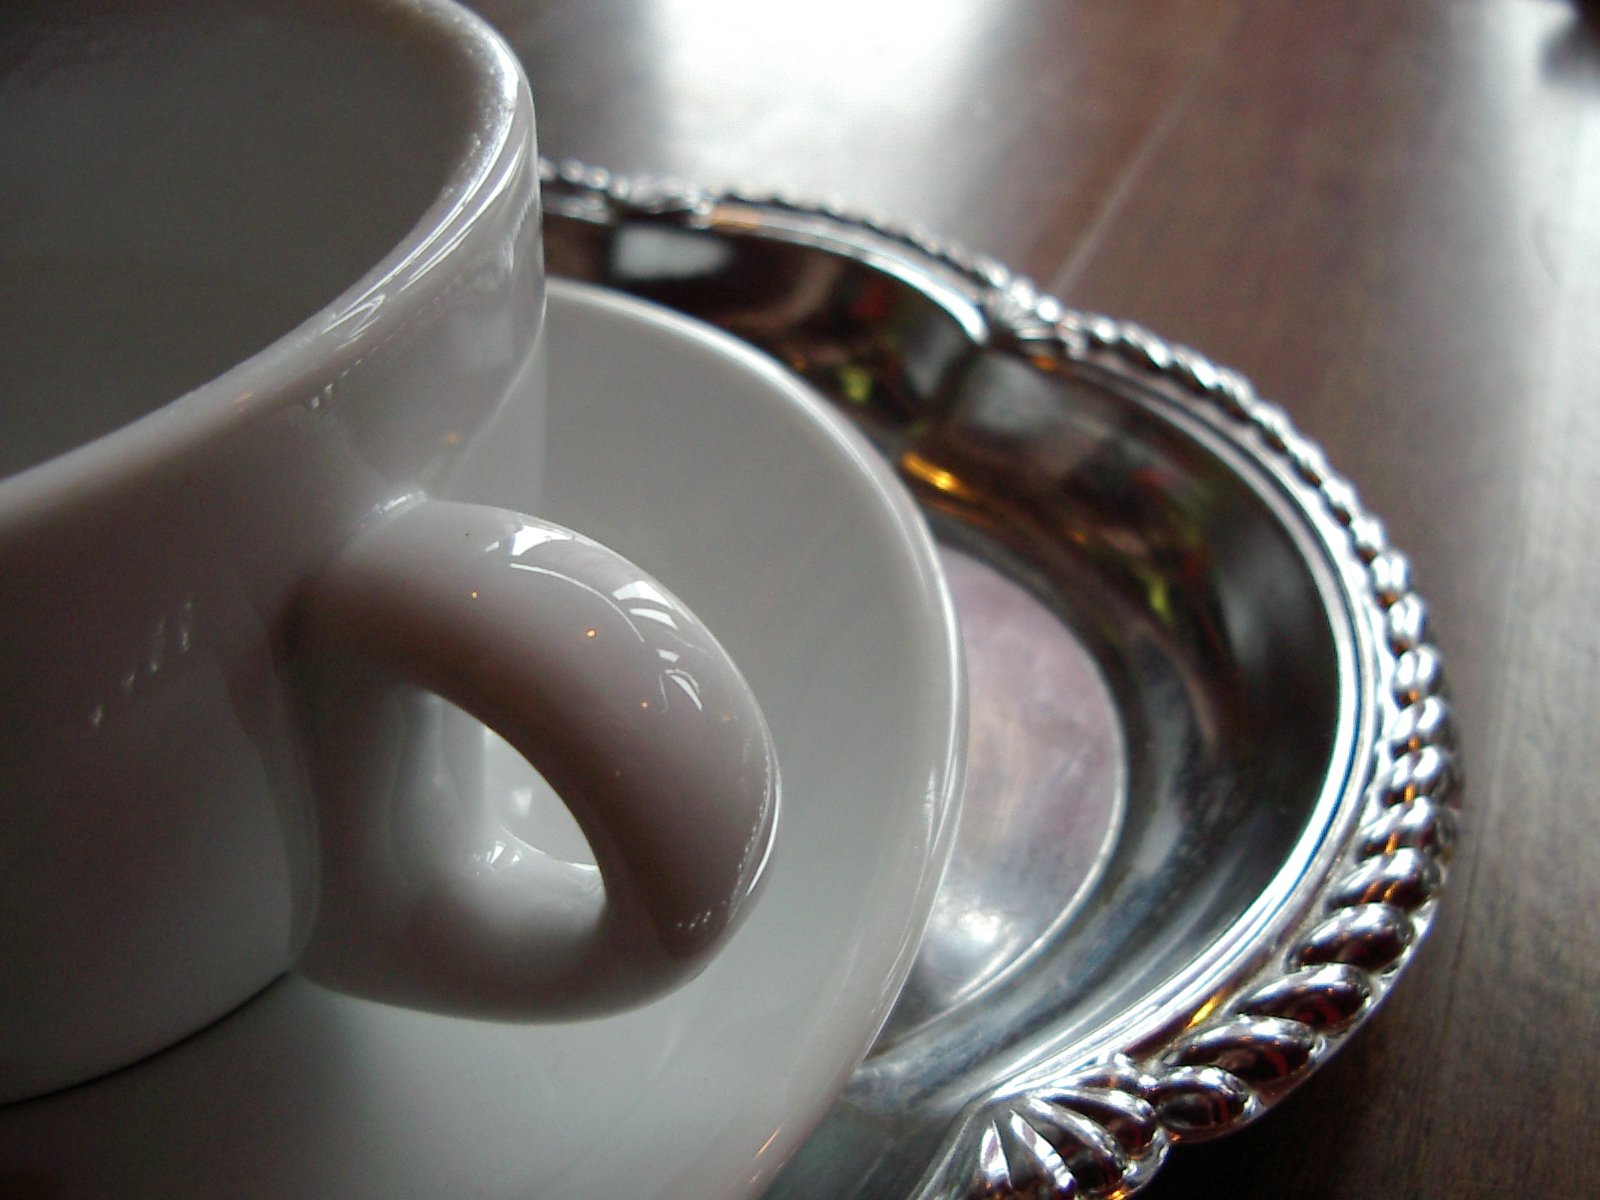 a white coffee mug is sitting next to a glass tray